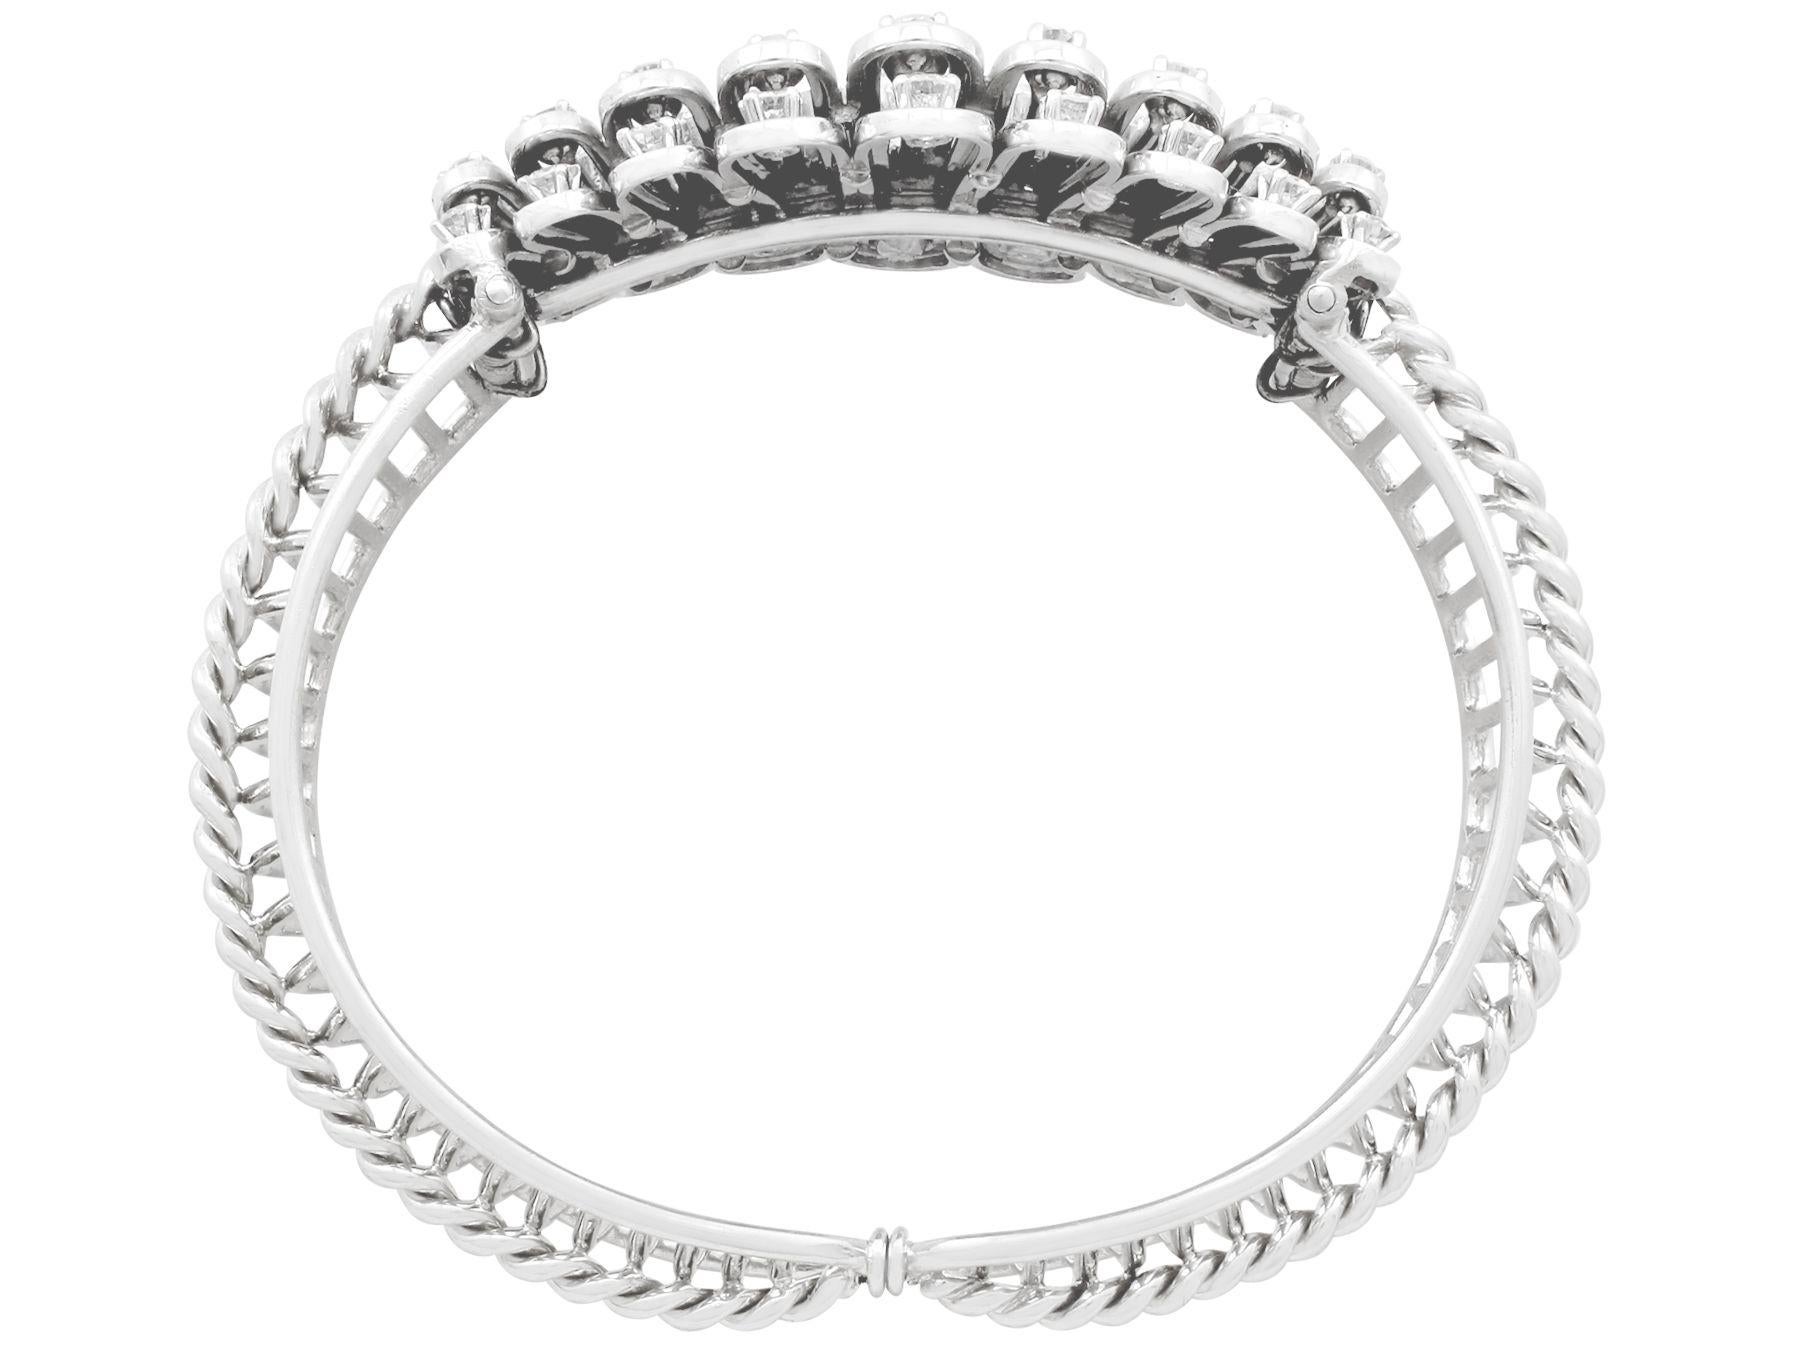 A stunning antique 1930s 4.87 carat diamond and 18 karat white gold bangle; part of our diverse antique jewelry and estate jewelry collections.

This stunning, fine and impressive antique diamond bangle has been crafted in 18k white gold.

The